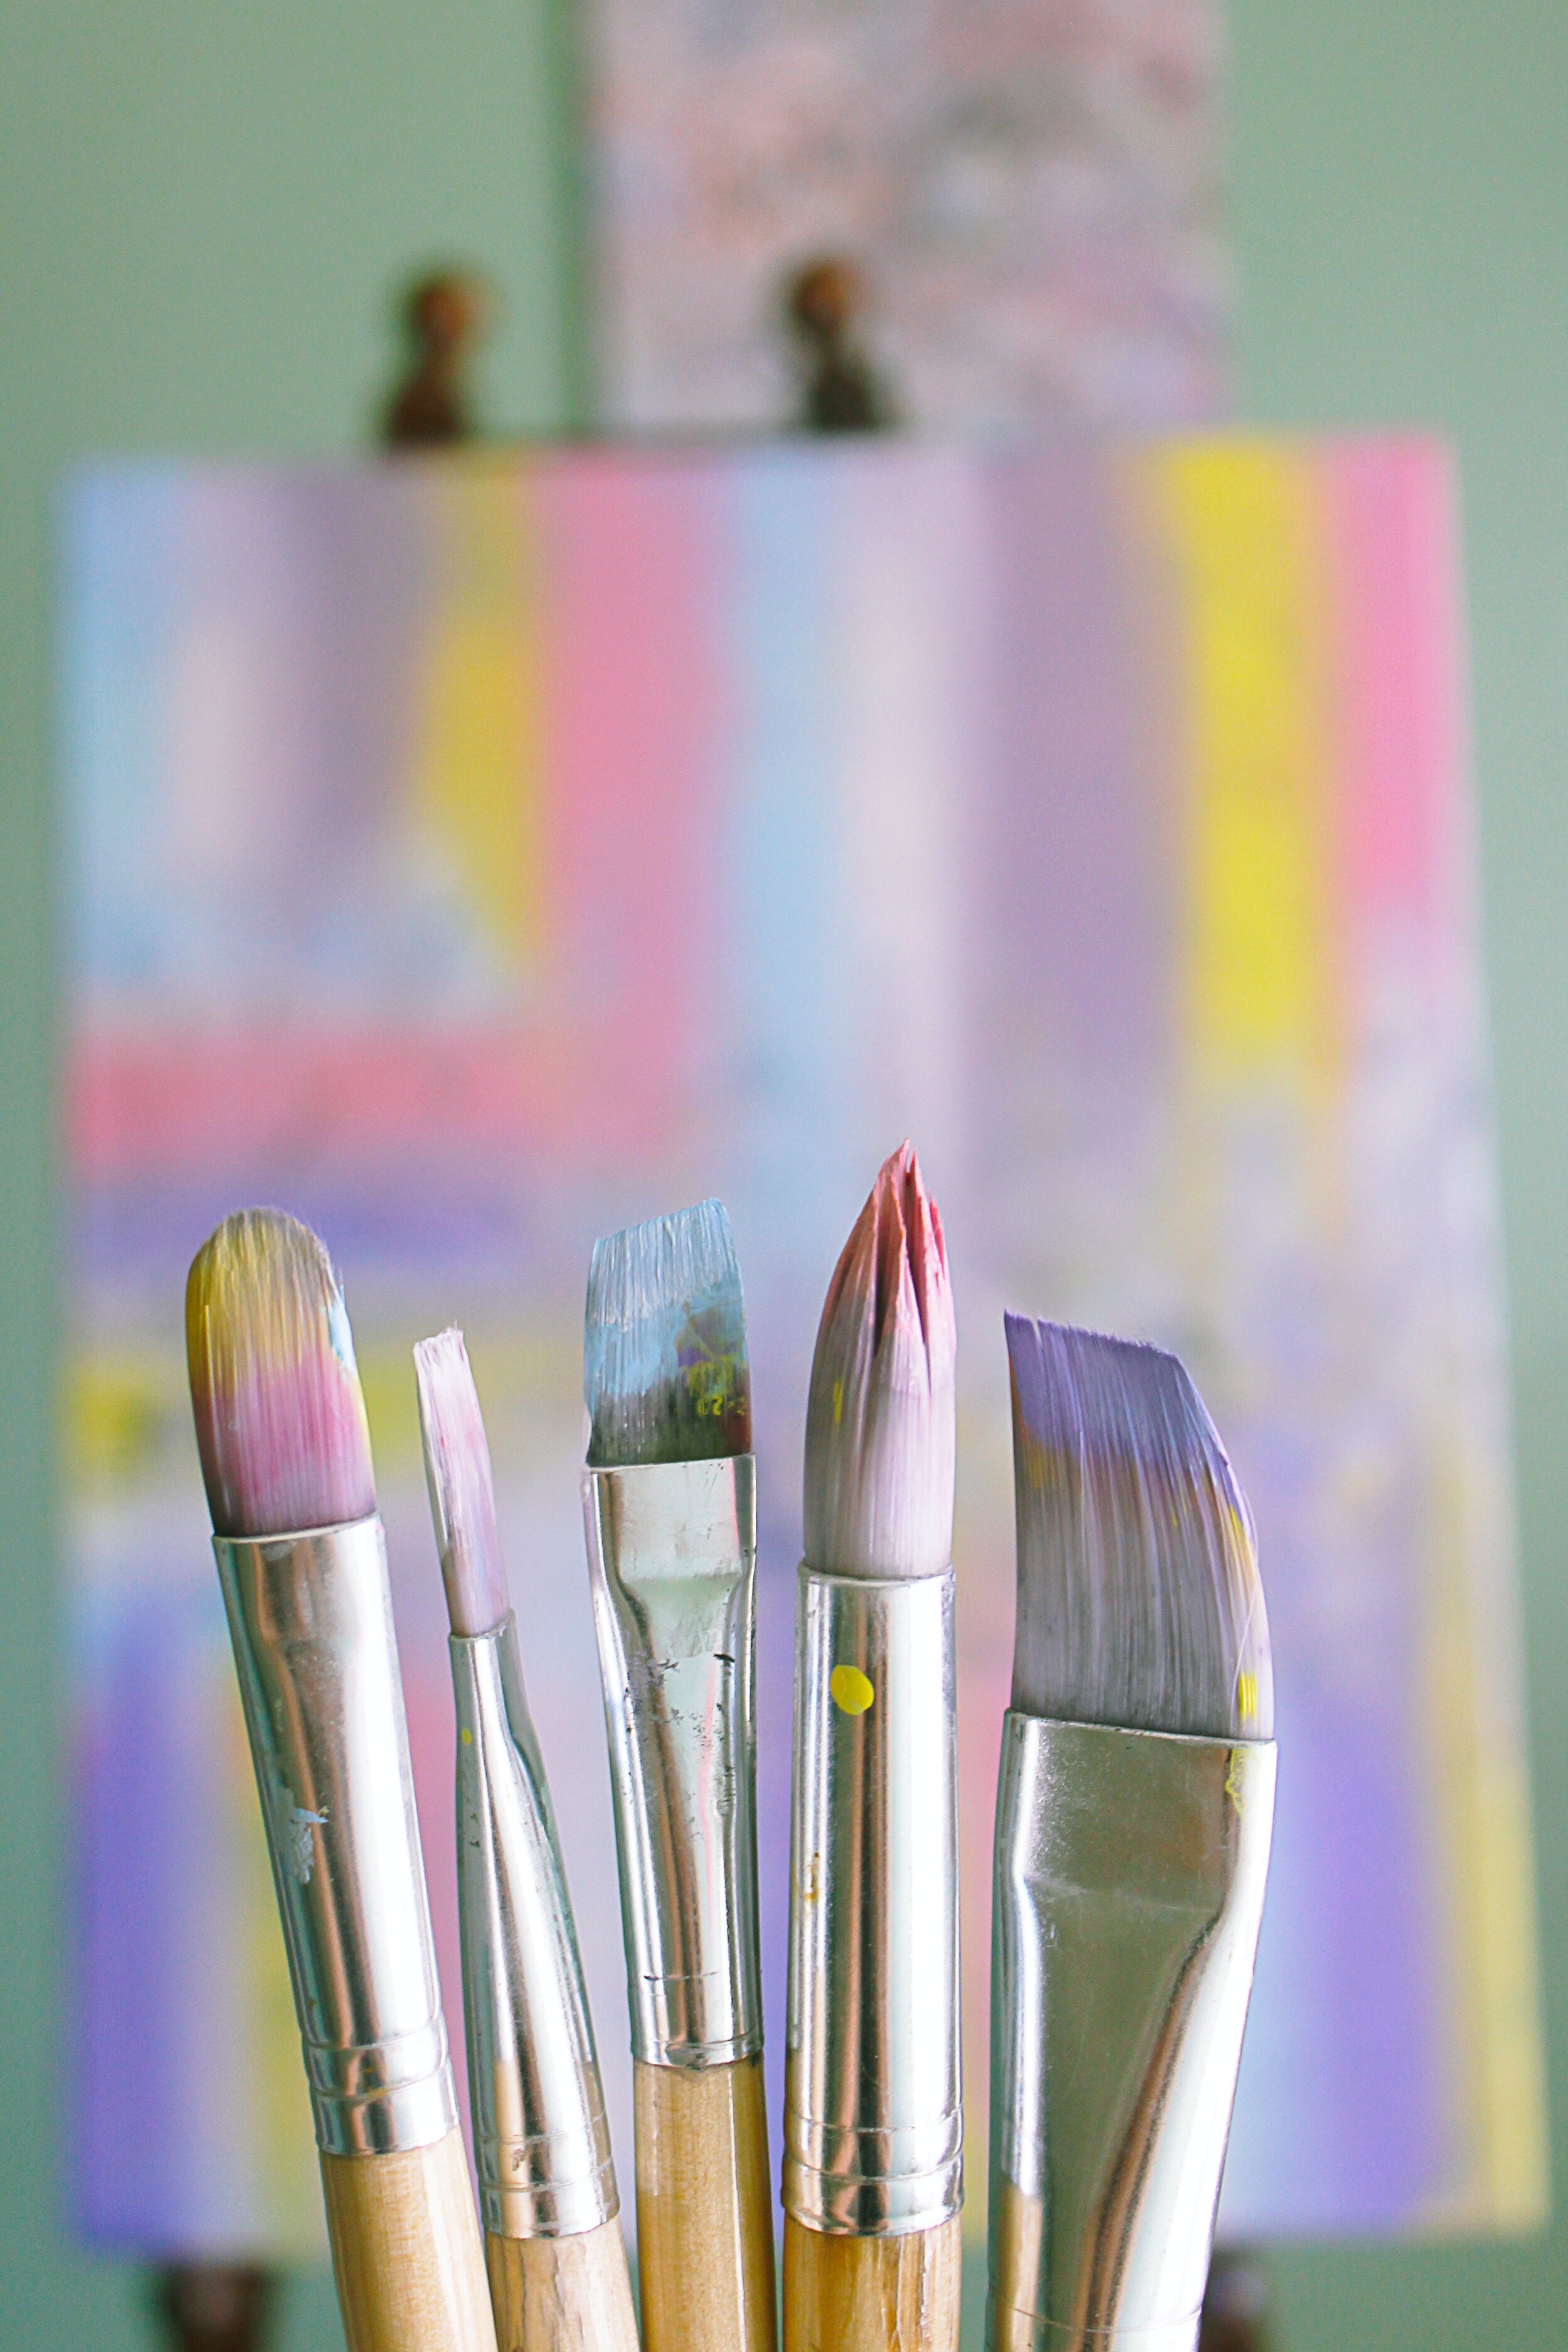 She Must Make Art : Watercolor Paint on Fabric: 10 Tips To Share